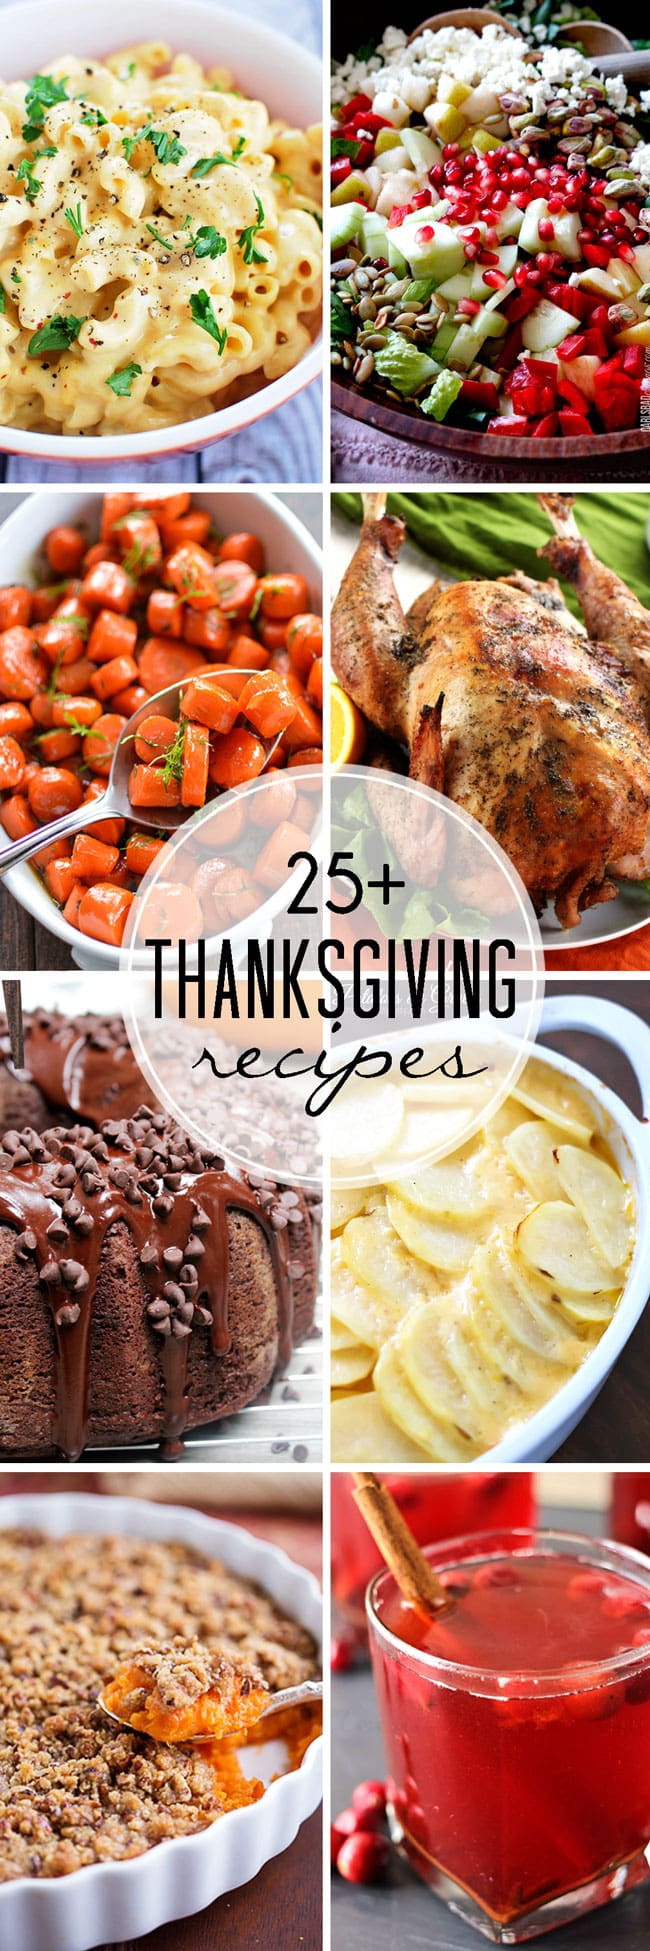 Best Turkey Recipes For Thanksgiving
 25 Thanksgiving Recipes That Skinny Chick Can Bake